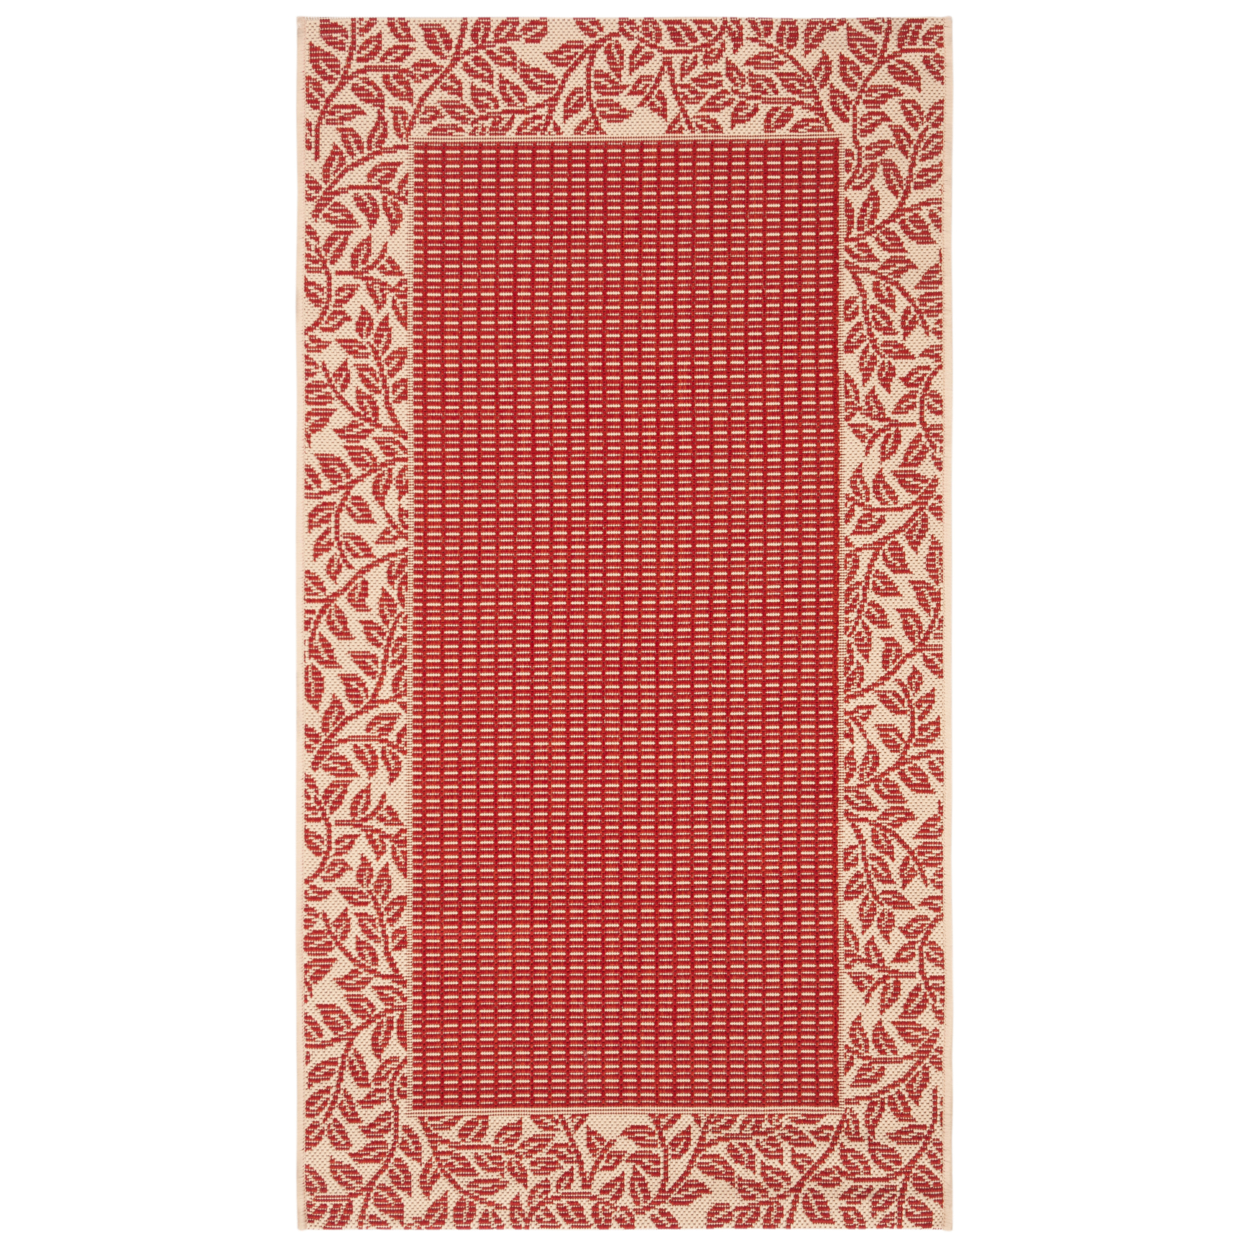 SAFAVIEH Courtyard CY0727-3707 Red / Natural Rug - 2' 7 X 5'